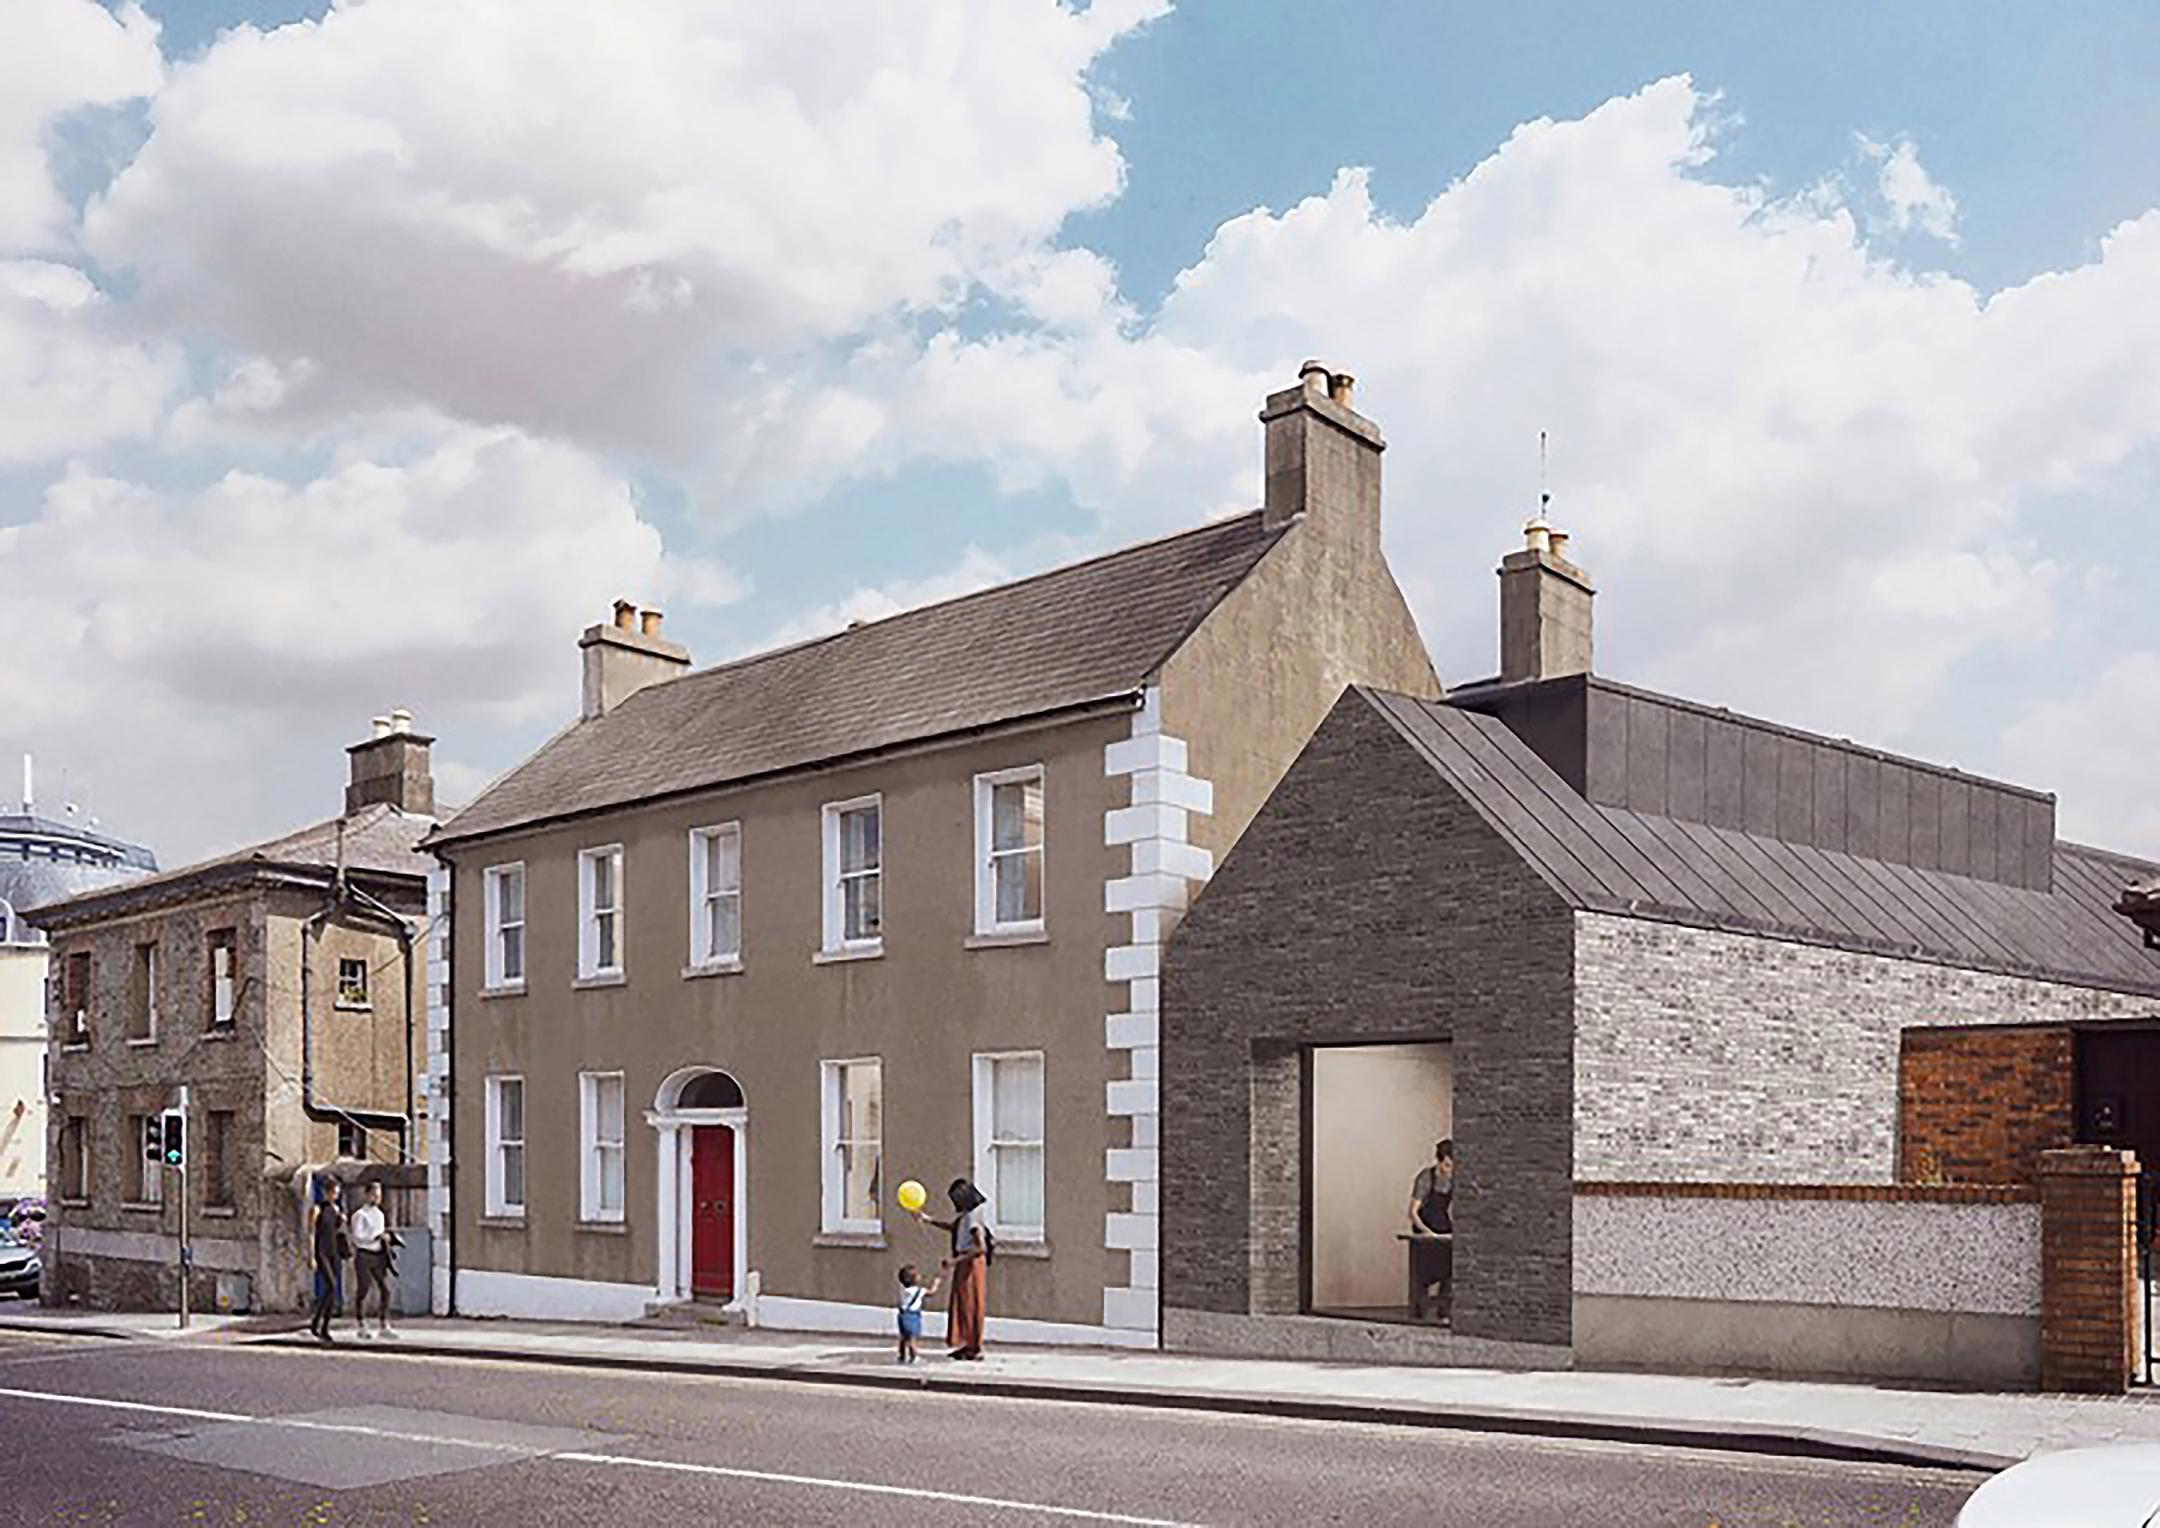 The Creative Hub is a key piece of the planned infrastructural development for Balbriggan